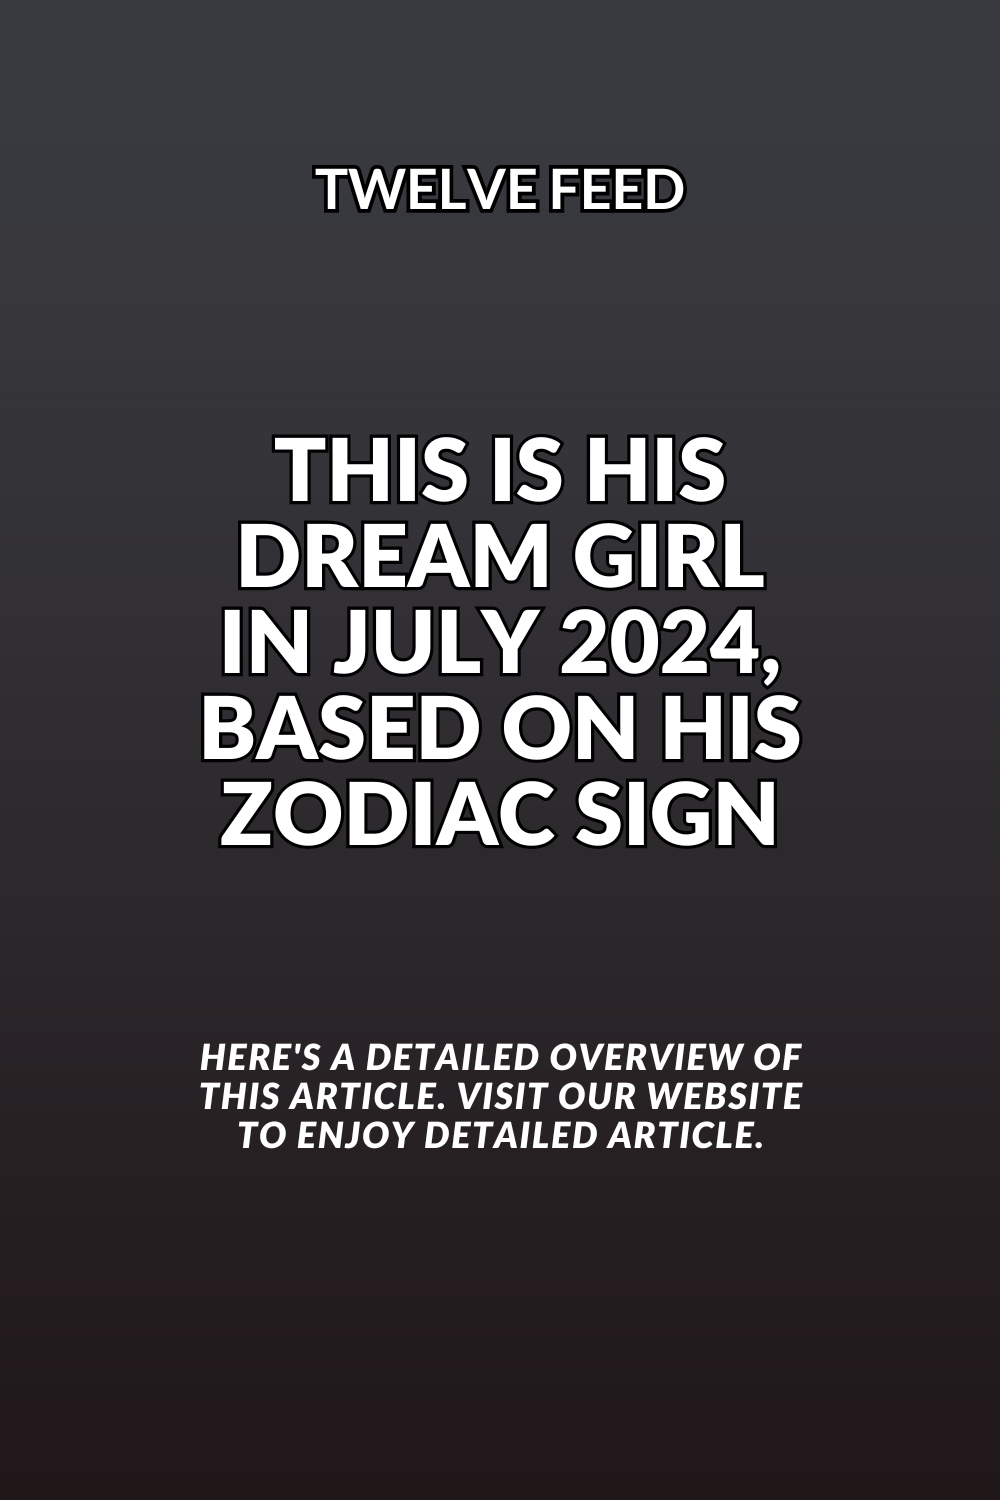 This Is His Dream Girl In July 2024, Based On His Zodiac Sign